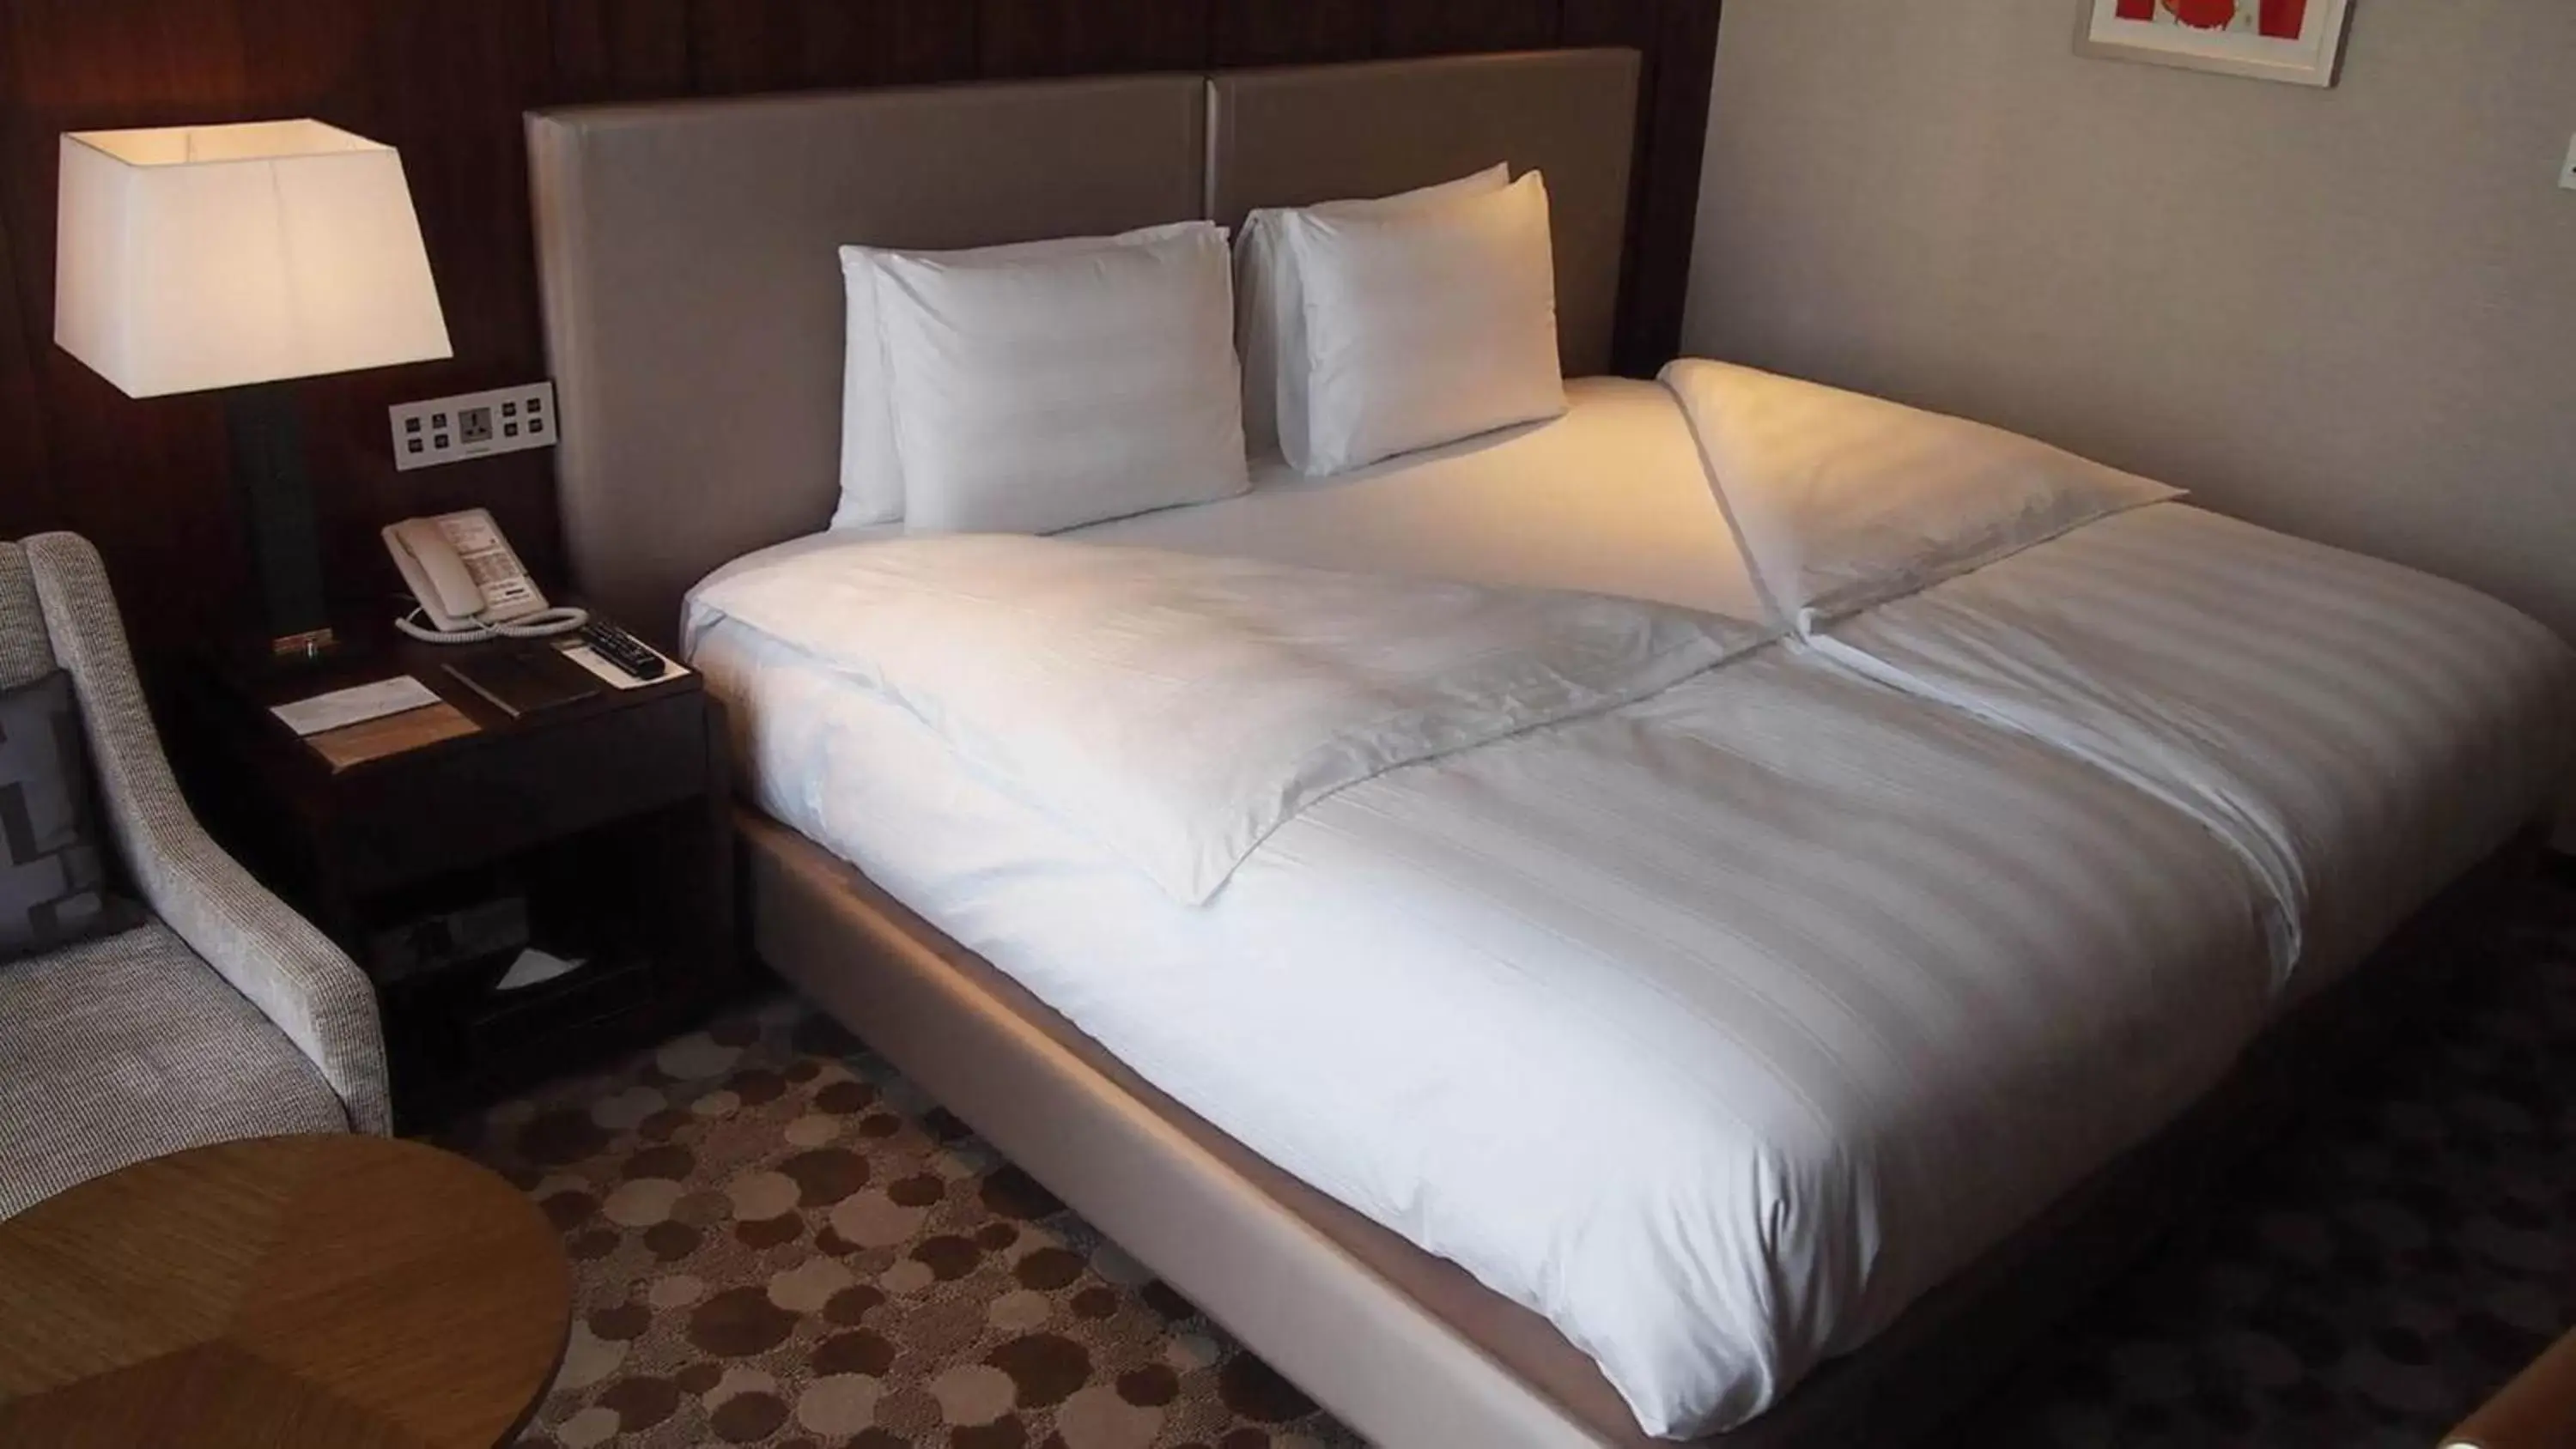 Bed in LOTTE City Hotel Daejeon